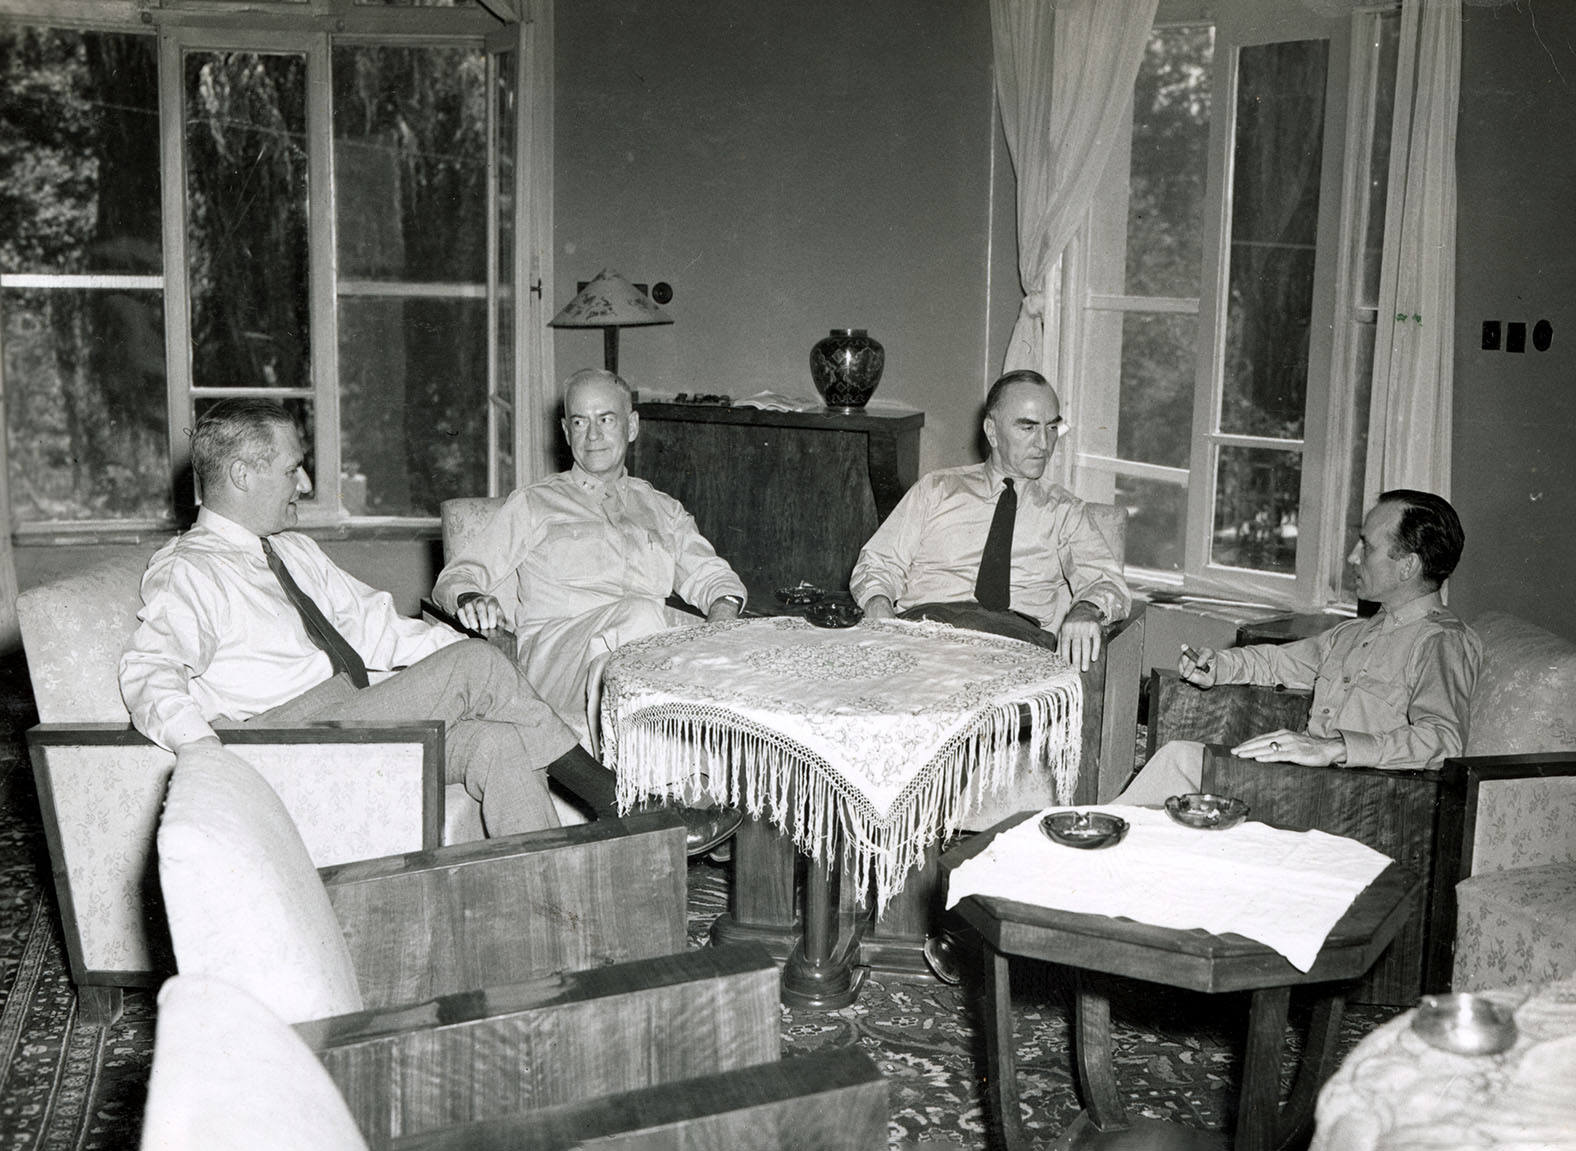 Four men sit in upholstered chairs in a large room